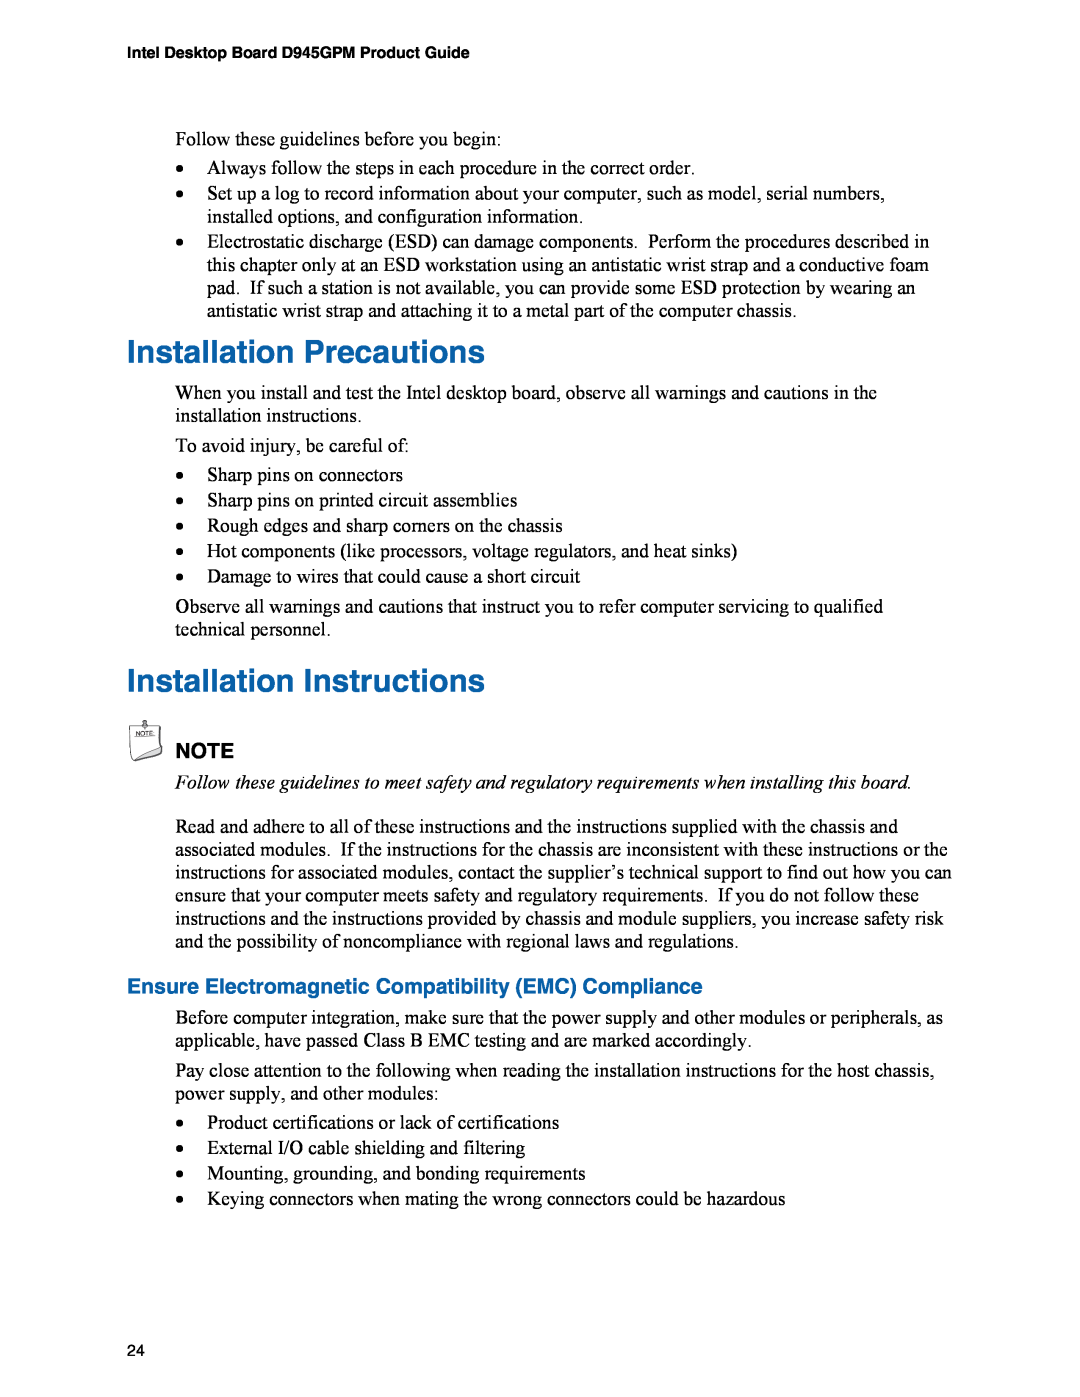 Intel D945GPM Installation Precautions, Installation Instructions, Ensure Electromagnetic Compatibility EMC Compliance 